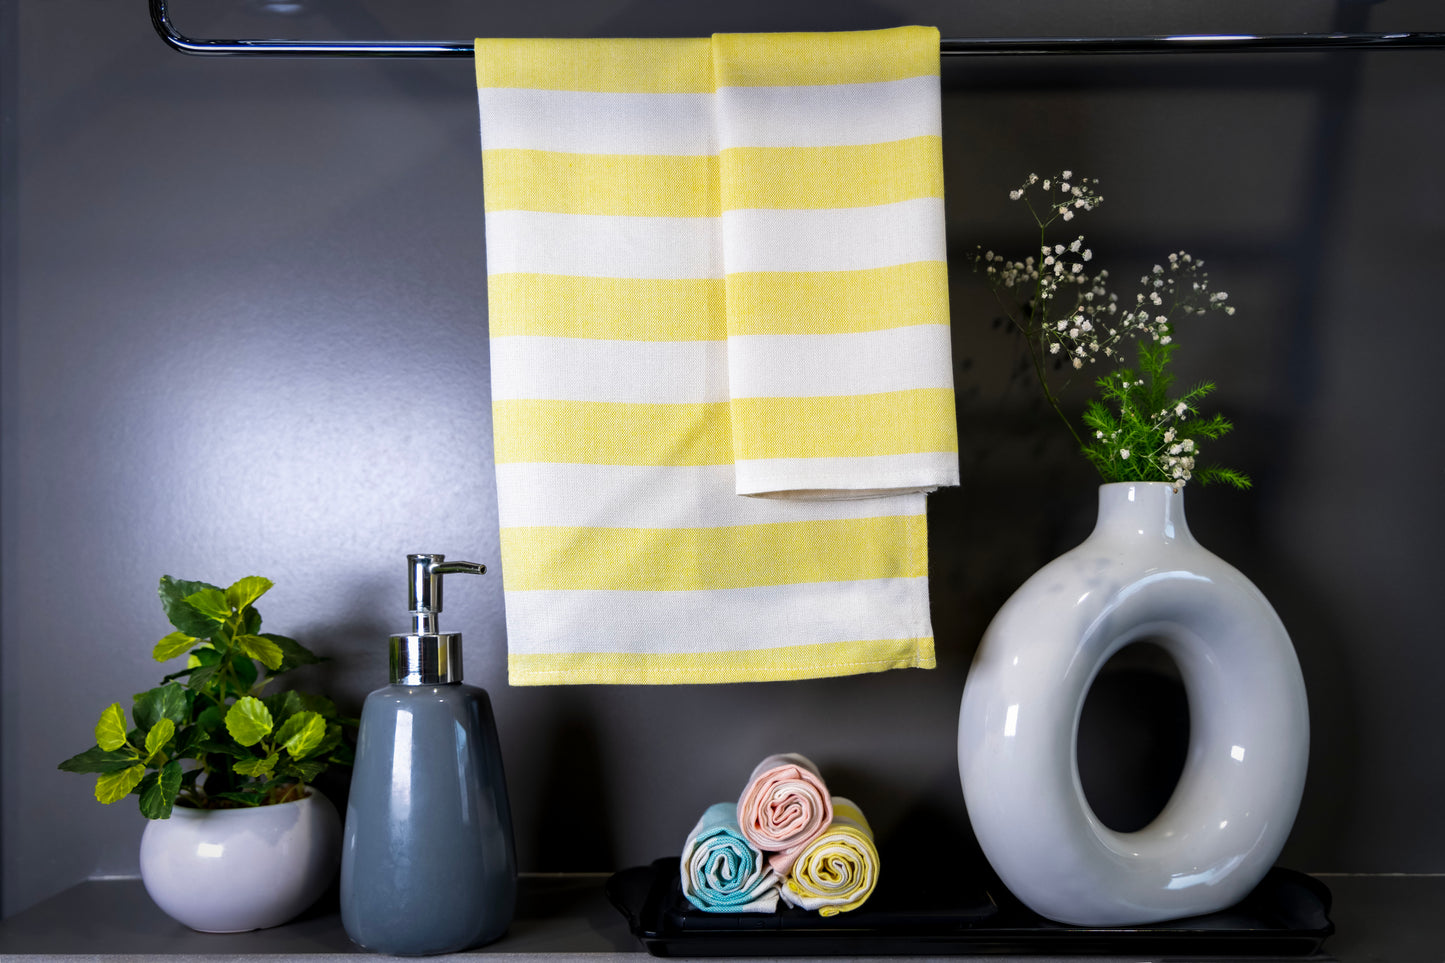 Multipurpose Bamboo Towels - Pack of 3 (Mint Blue, Peach, Golden Yellow)